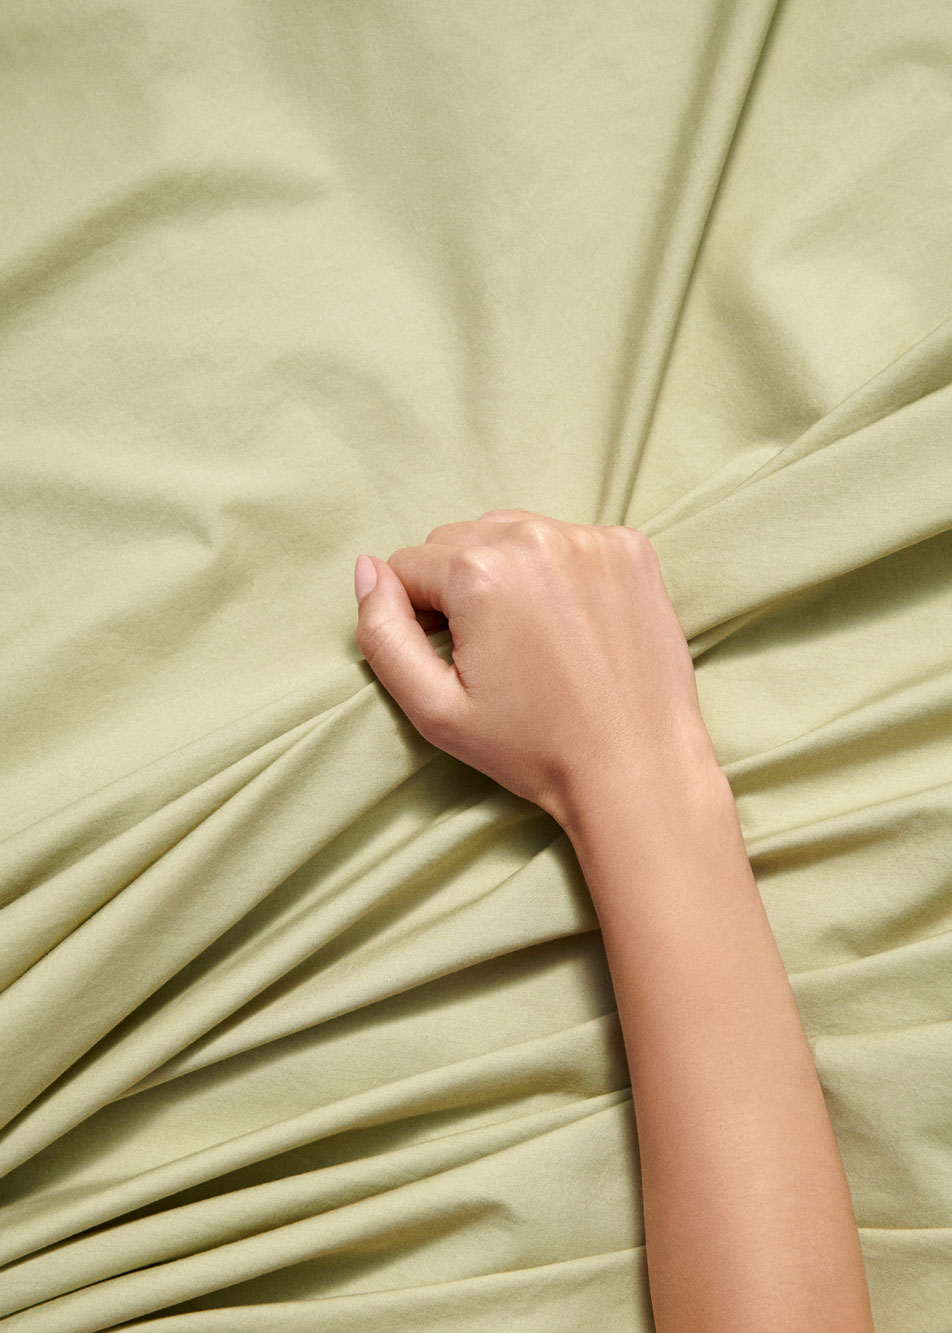 A hand holding onto a pale green sheet